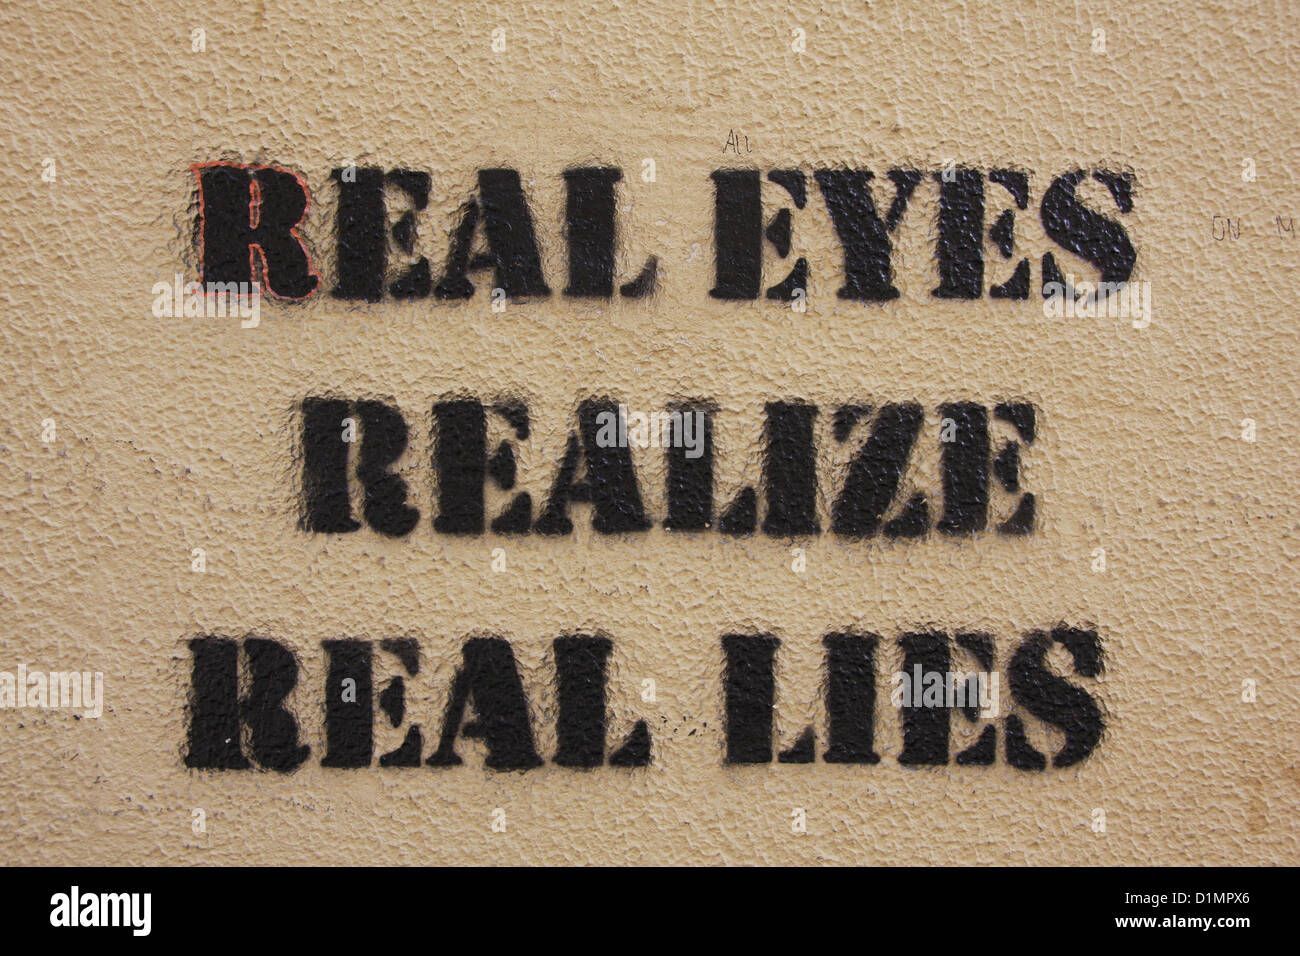 Real eyes realize real lies hi-res stock photography and images - Alamy